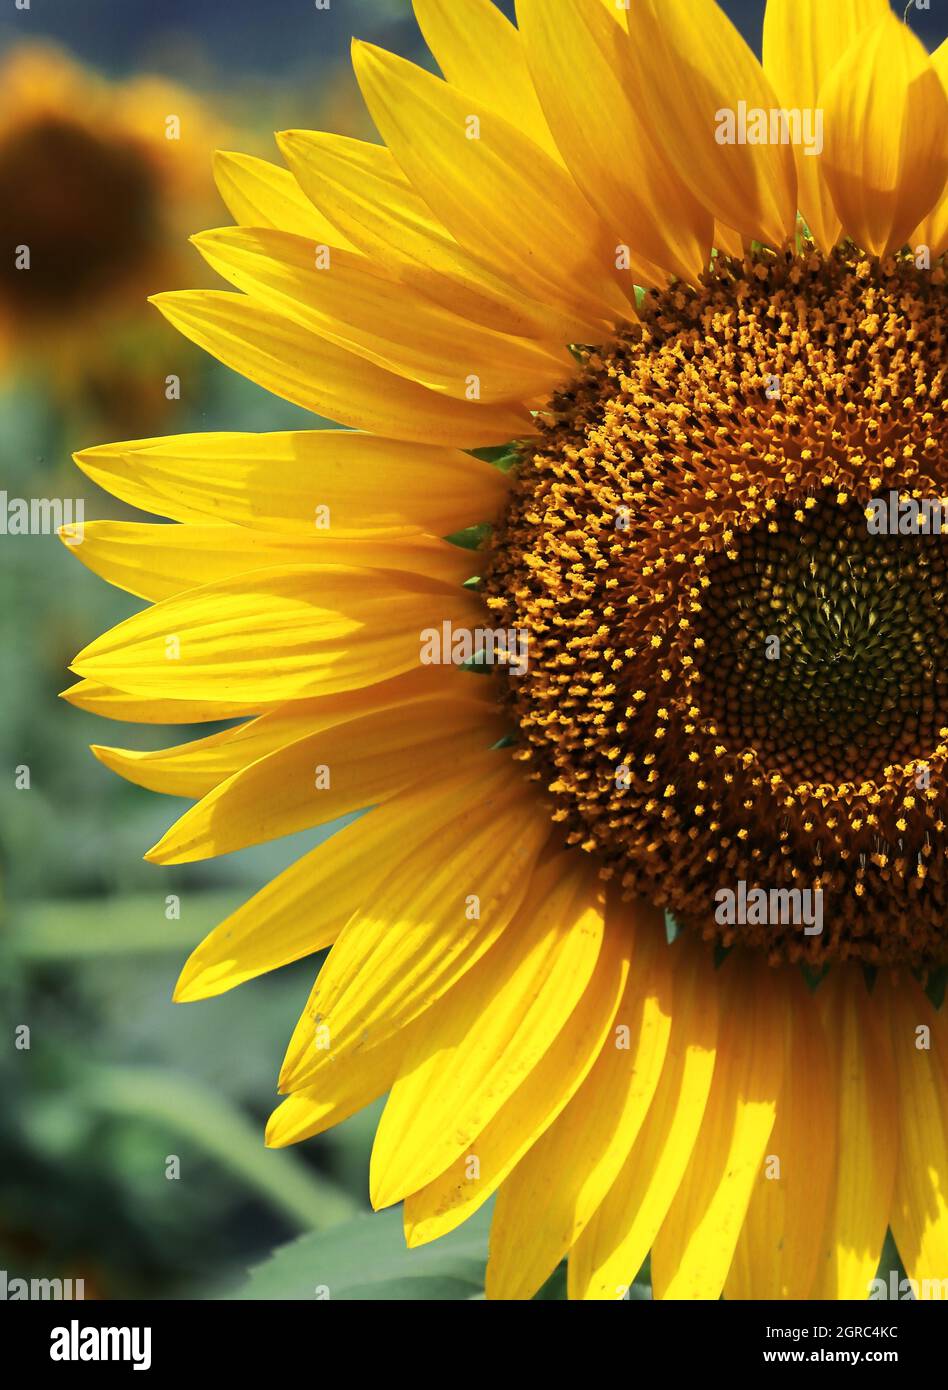 sunflowers (helianthus annuus) are blooming in the field in spring season Stock Photo